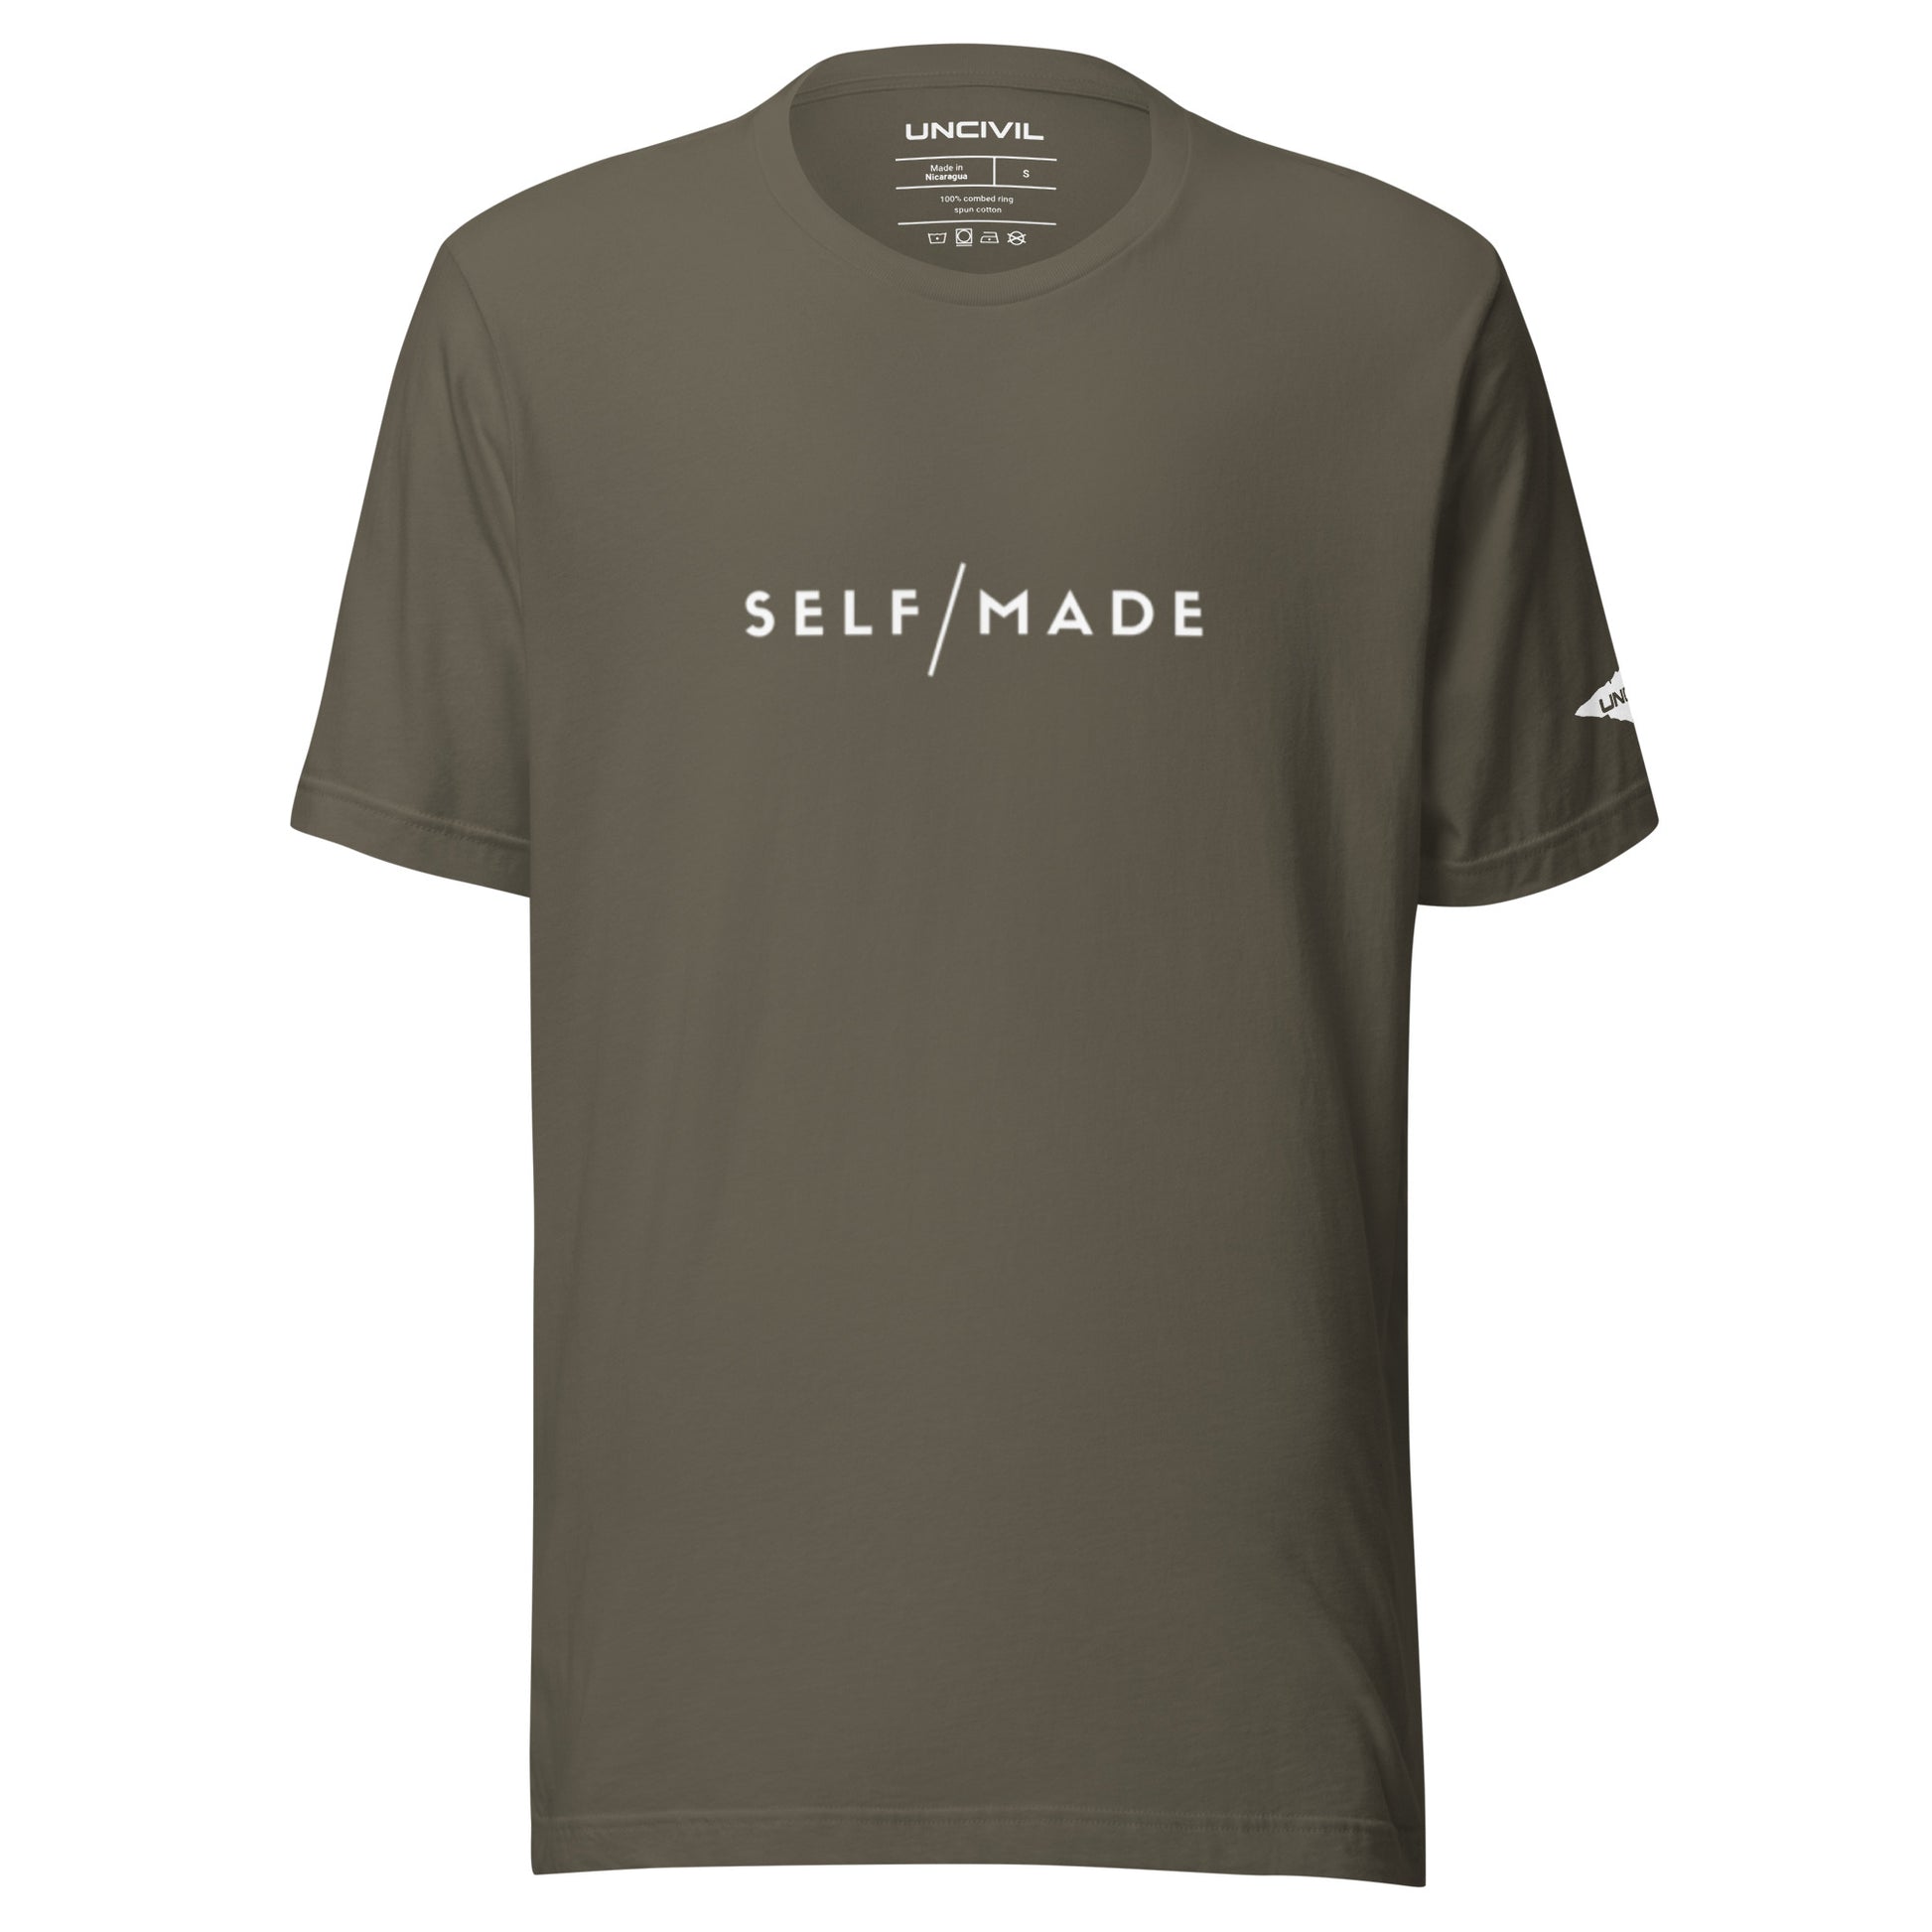 Our Self/Made UNCIVIL lifestyle shirt embodies empowerment and resilience. Army green unisex shirt.